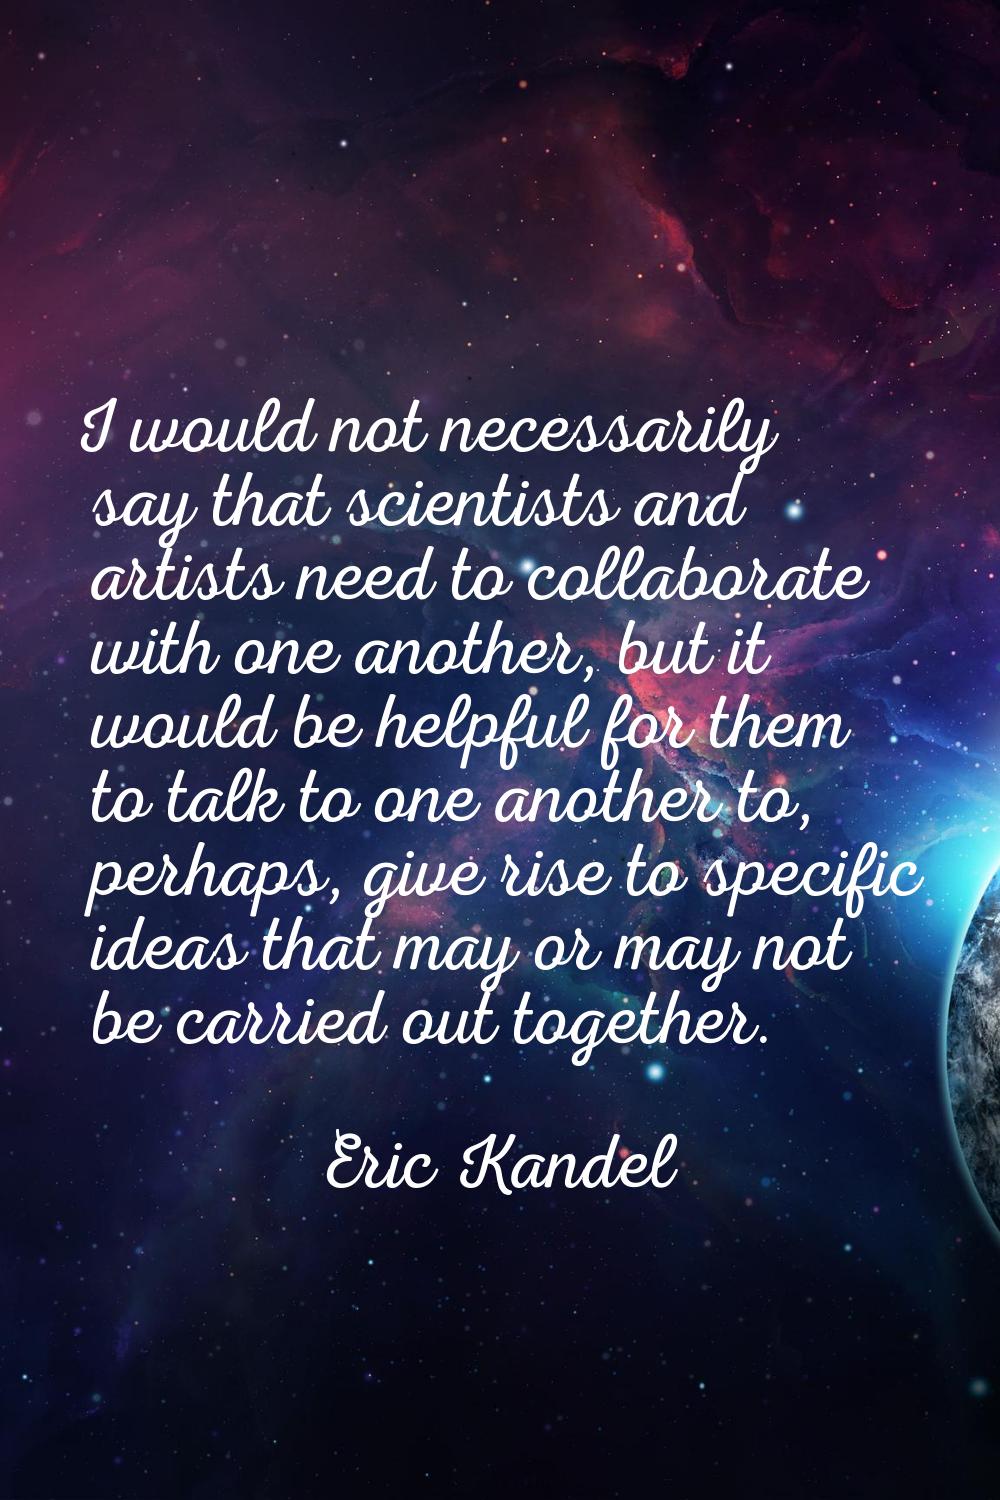 I would not necessarily say that scientists and artists need to collaborate with one another, but i